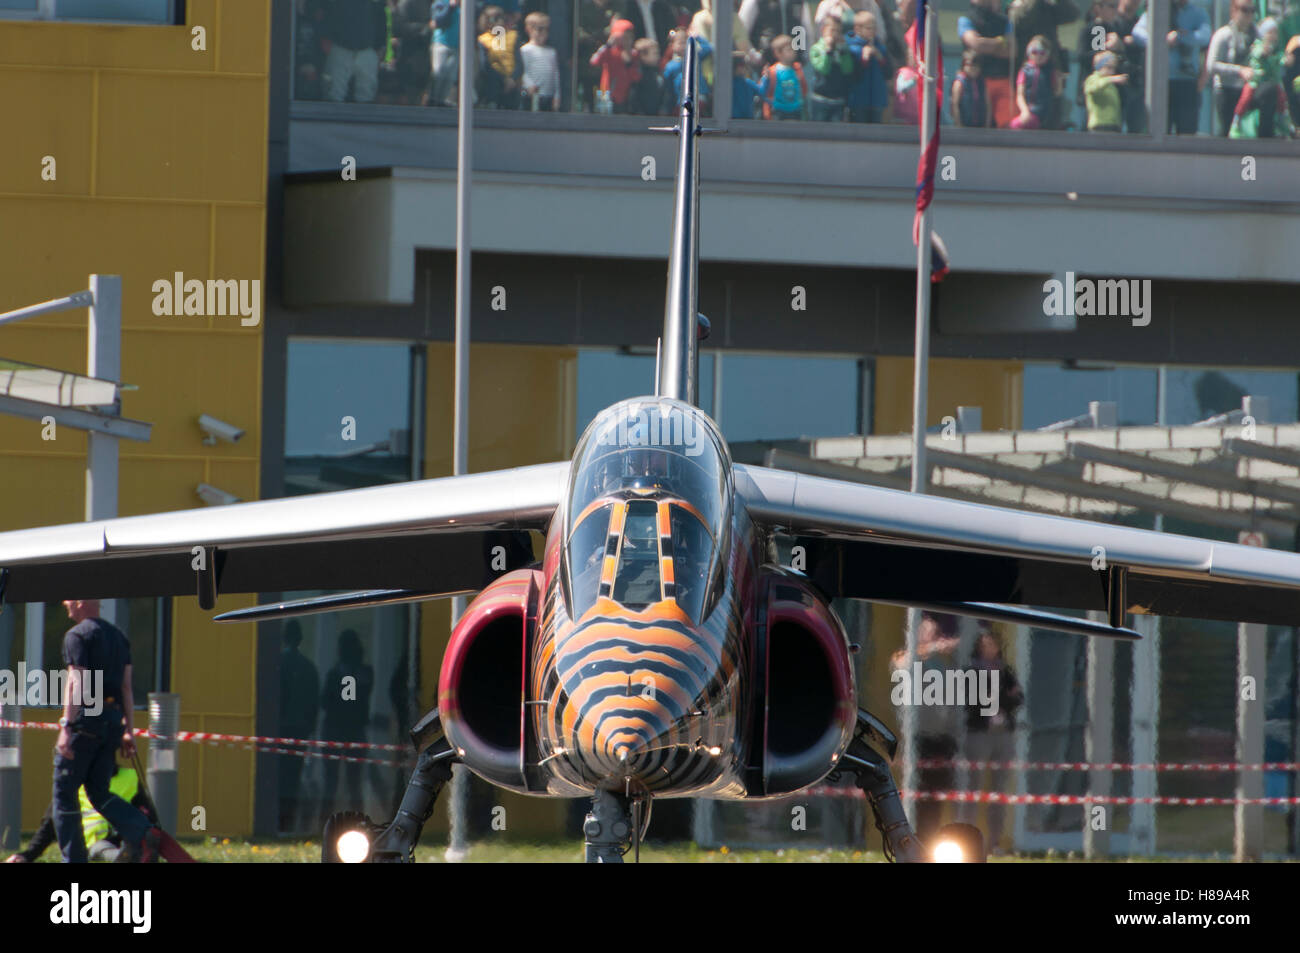 Maribor, Slovenia - April 16, 2016: Red Bull's Alpha Jet as part of display team The Flying Bulls on display Stock Photo